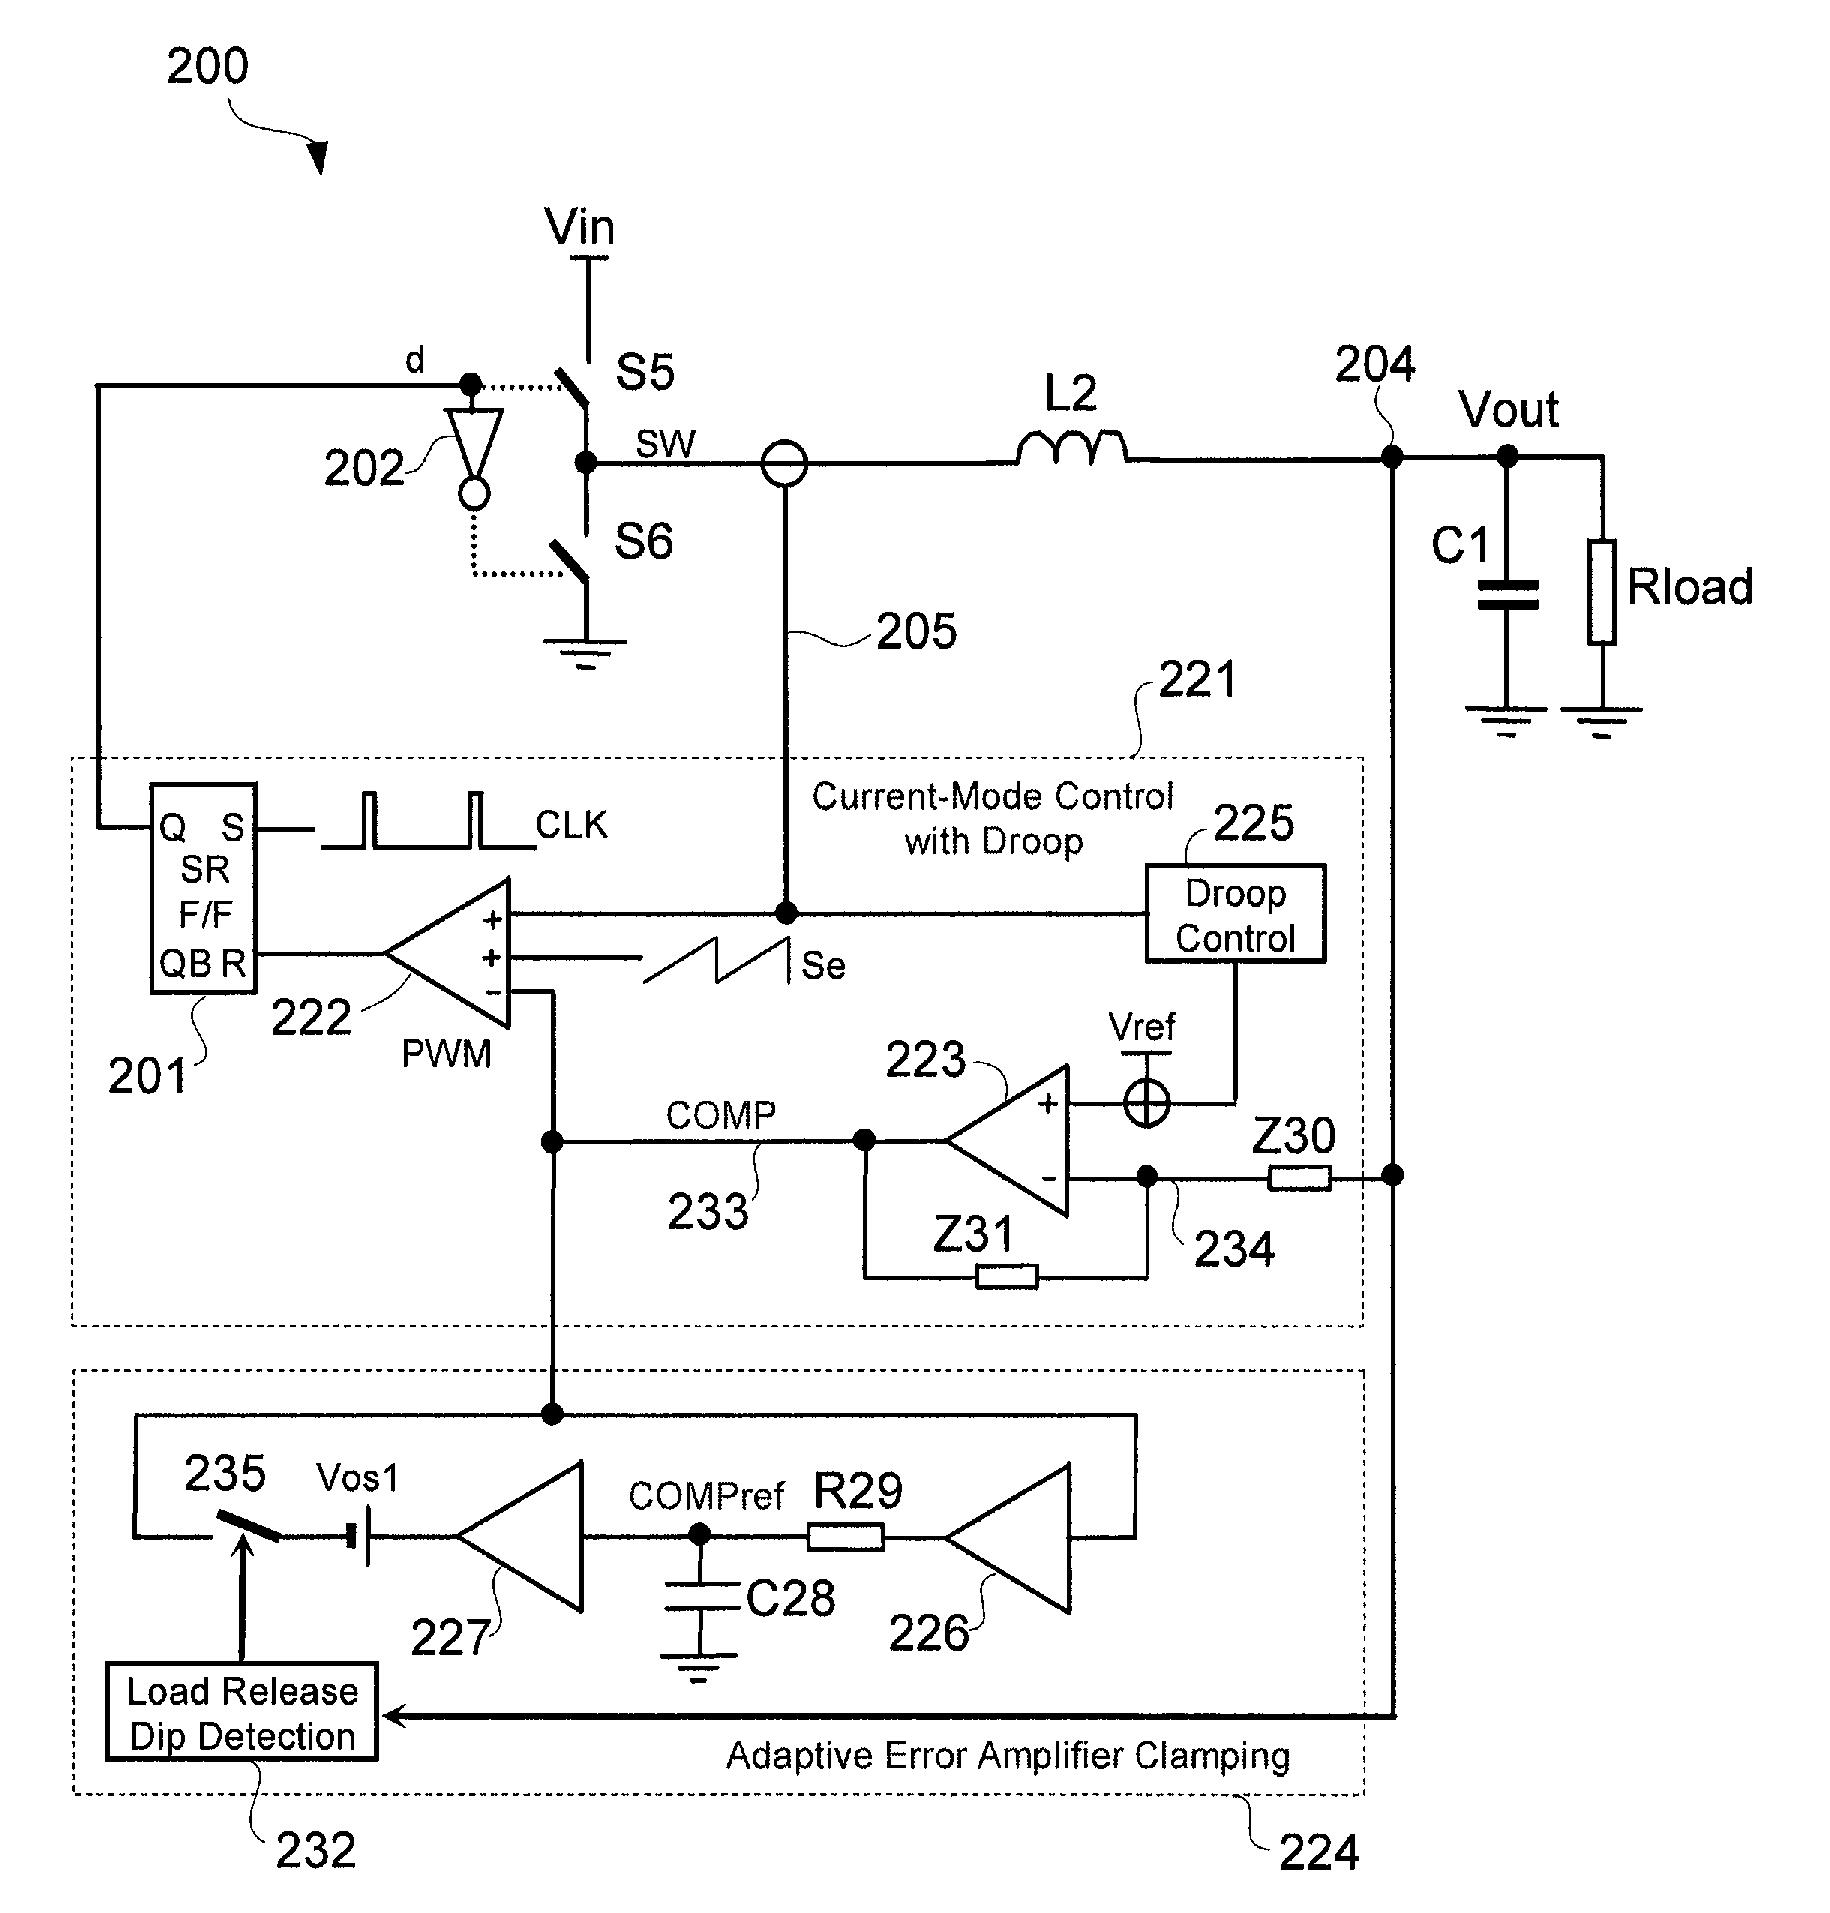 Non-linear control techniques for improving transient response to load current step change